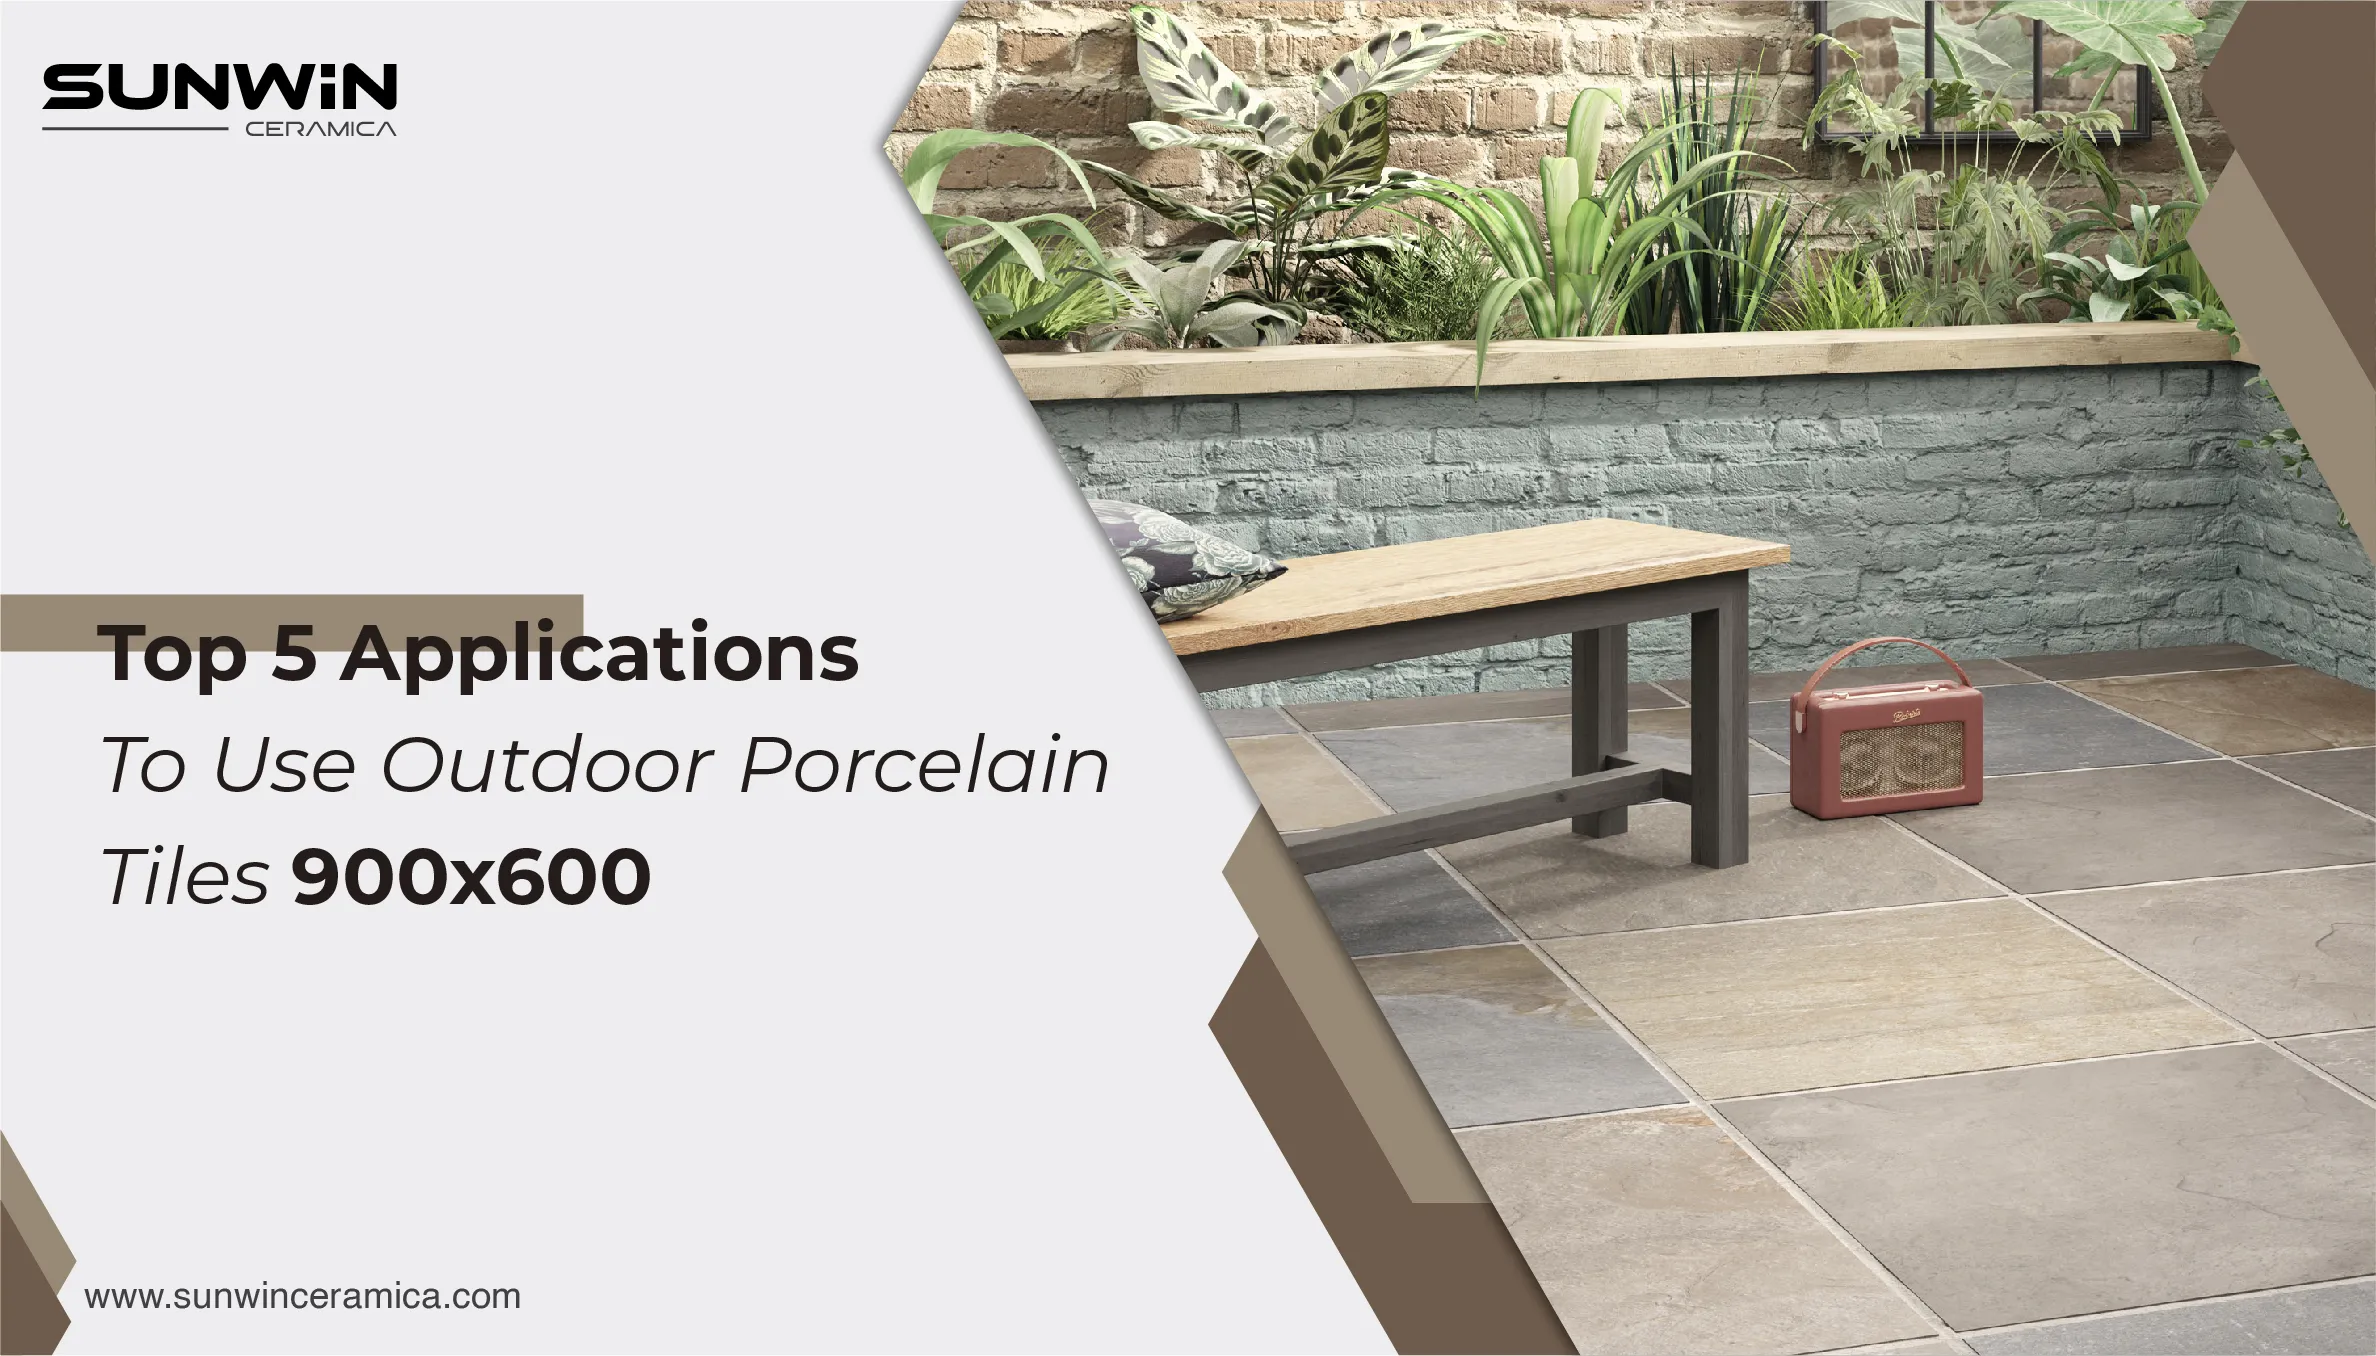 Top 5 Applications To Use Outdoor Porcelain Tiles 900x600